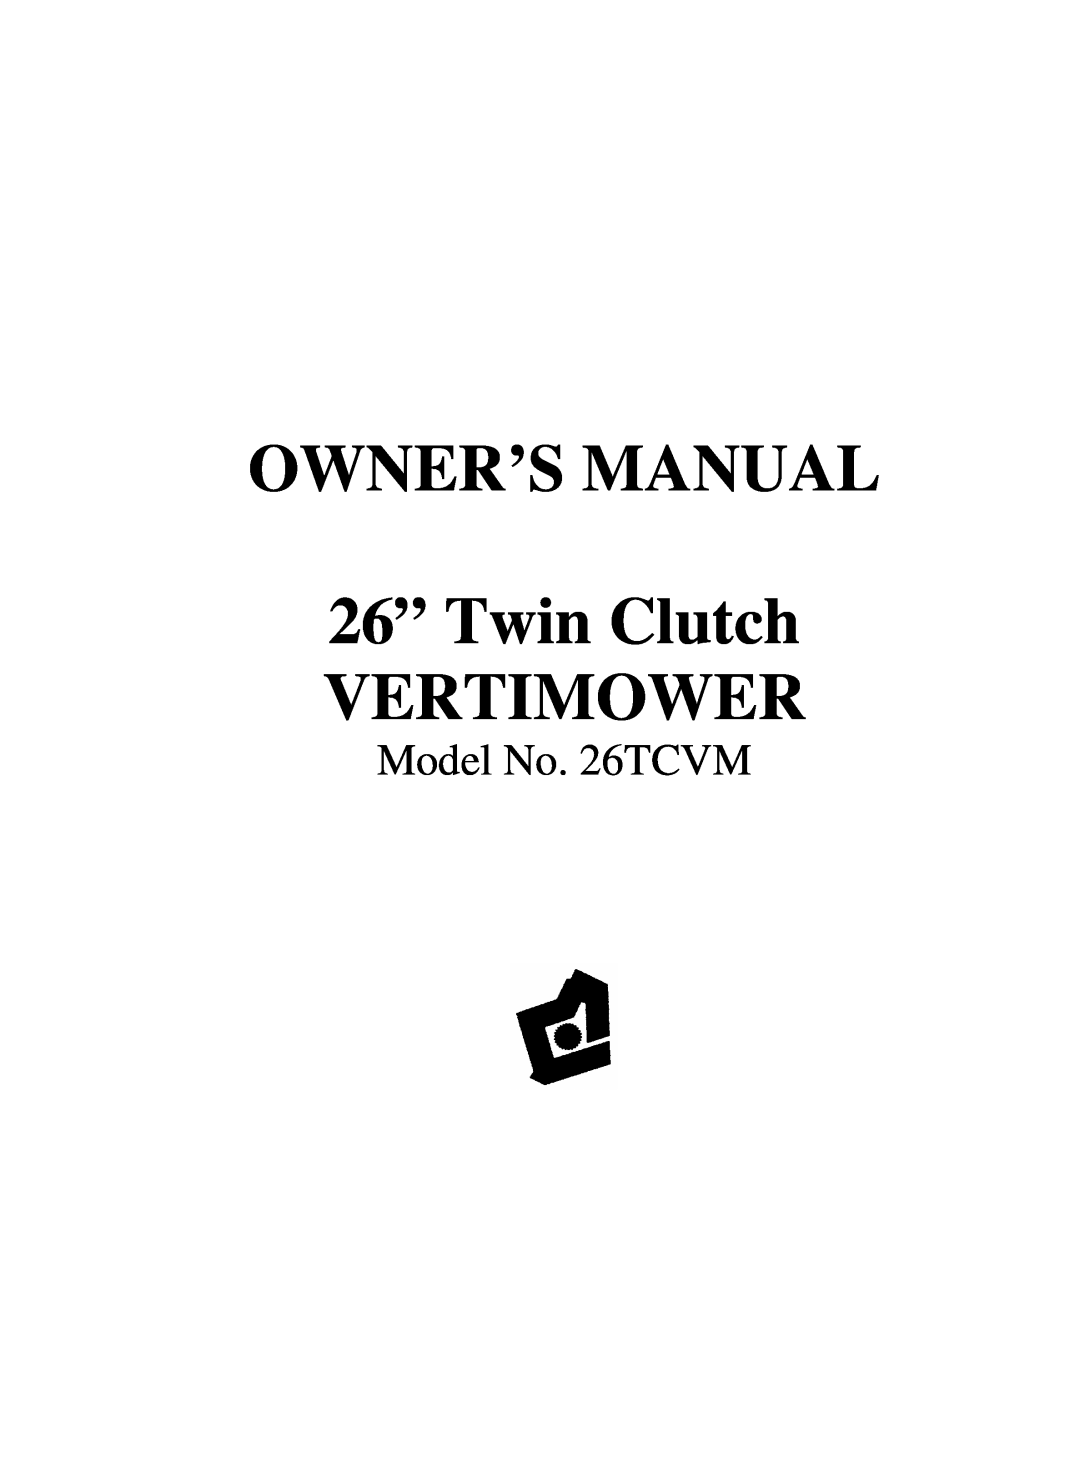 M.E.Y. Equipment owner manual 26” Twin Clutch VERTIMOWER, Model No. 26TCVM 